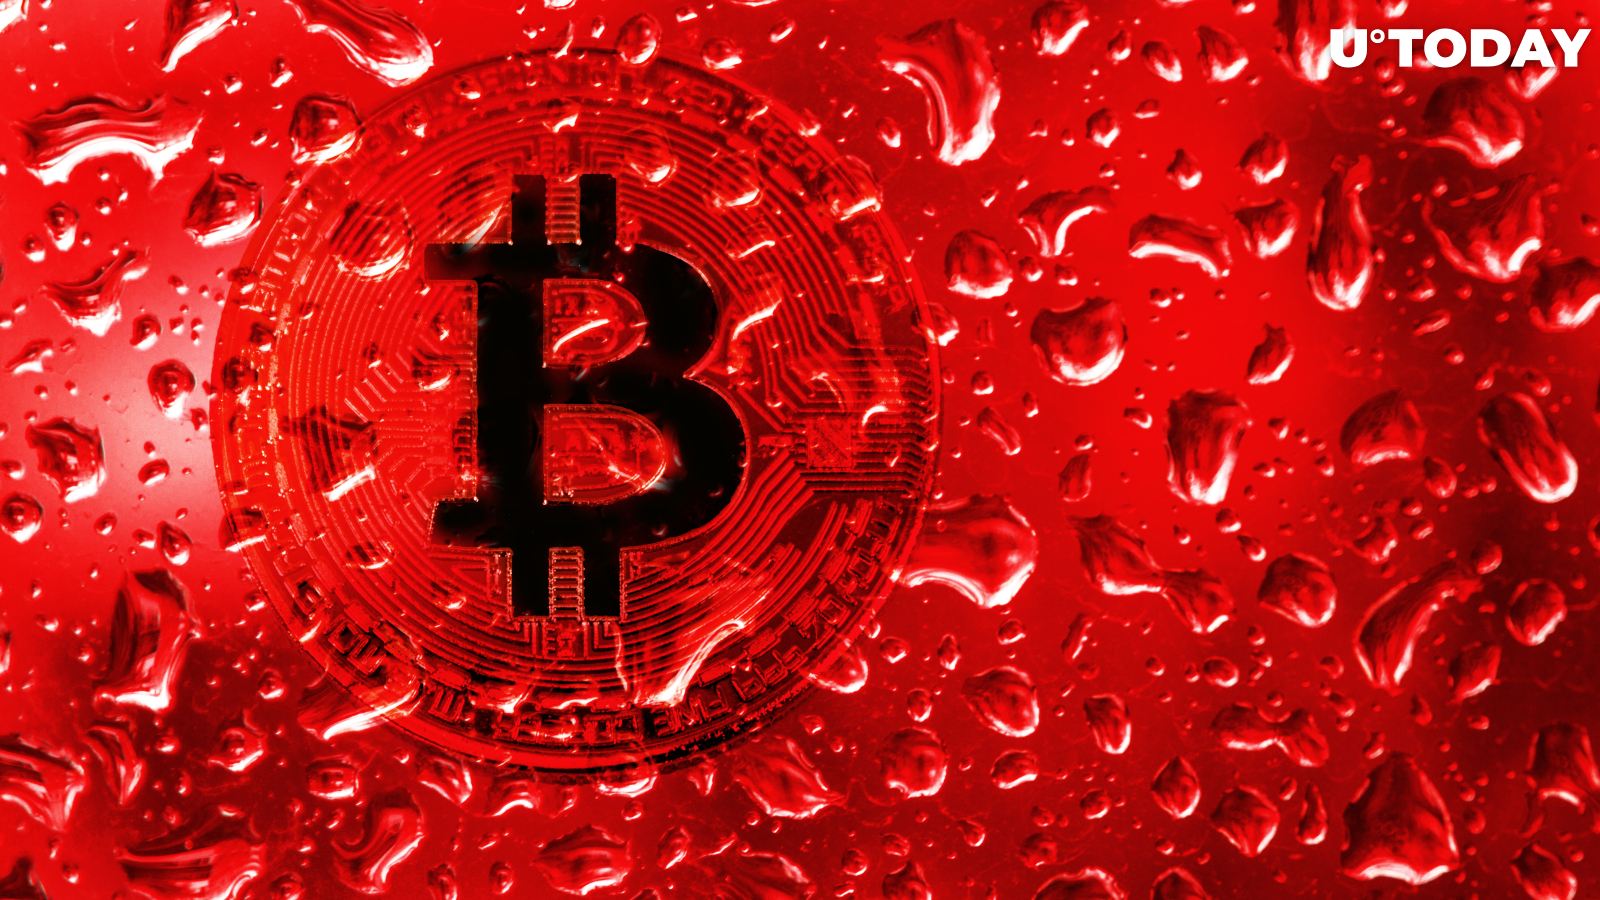 $129 Million Liquidated as Bitcoin Trims $2,000 in No Time